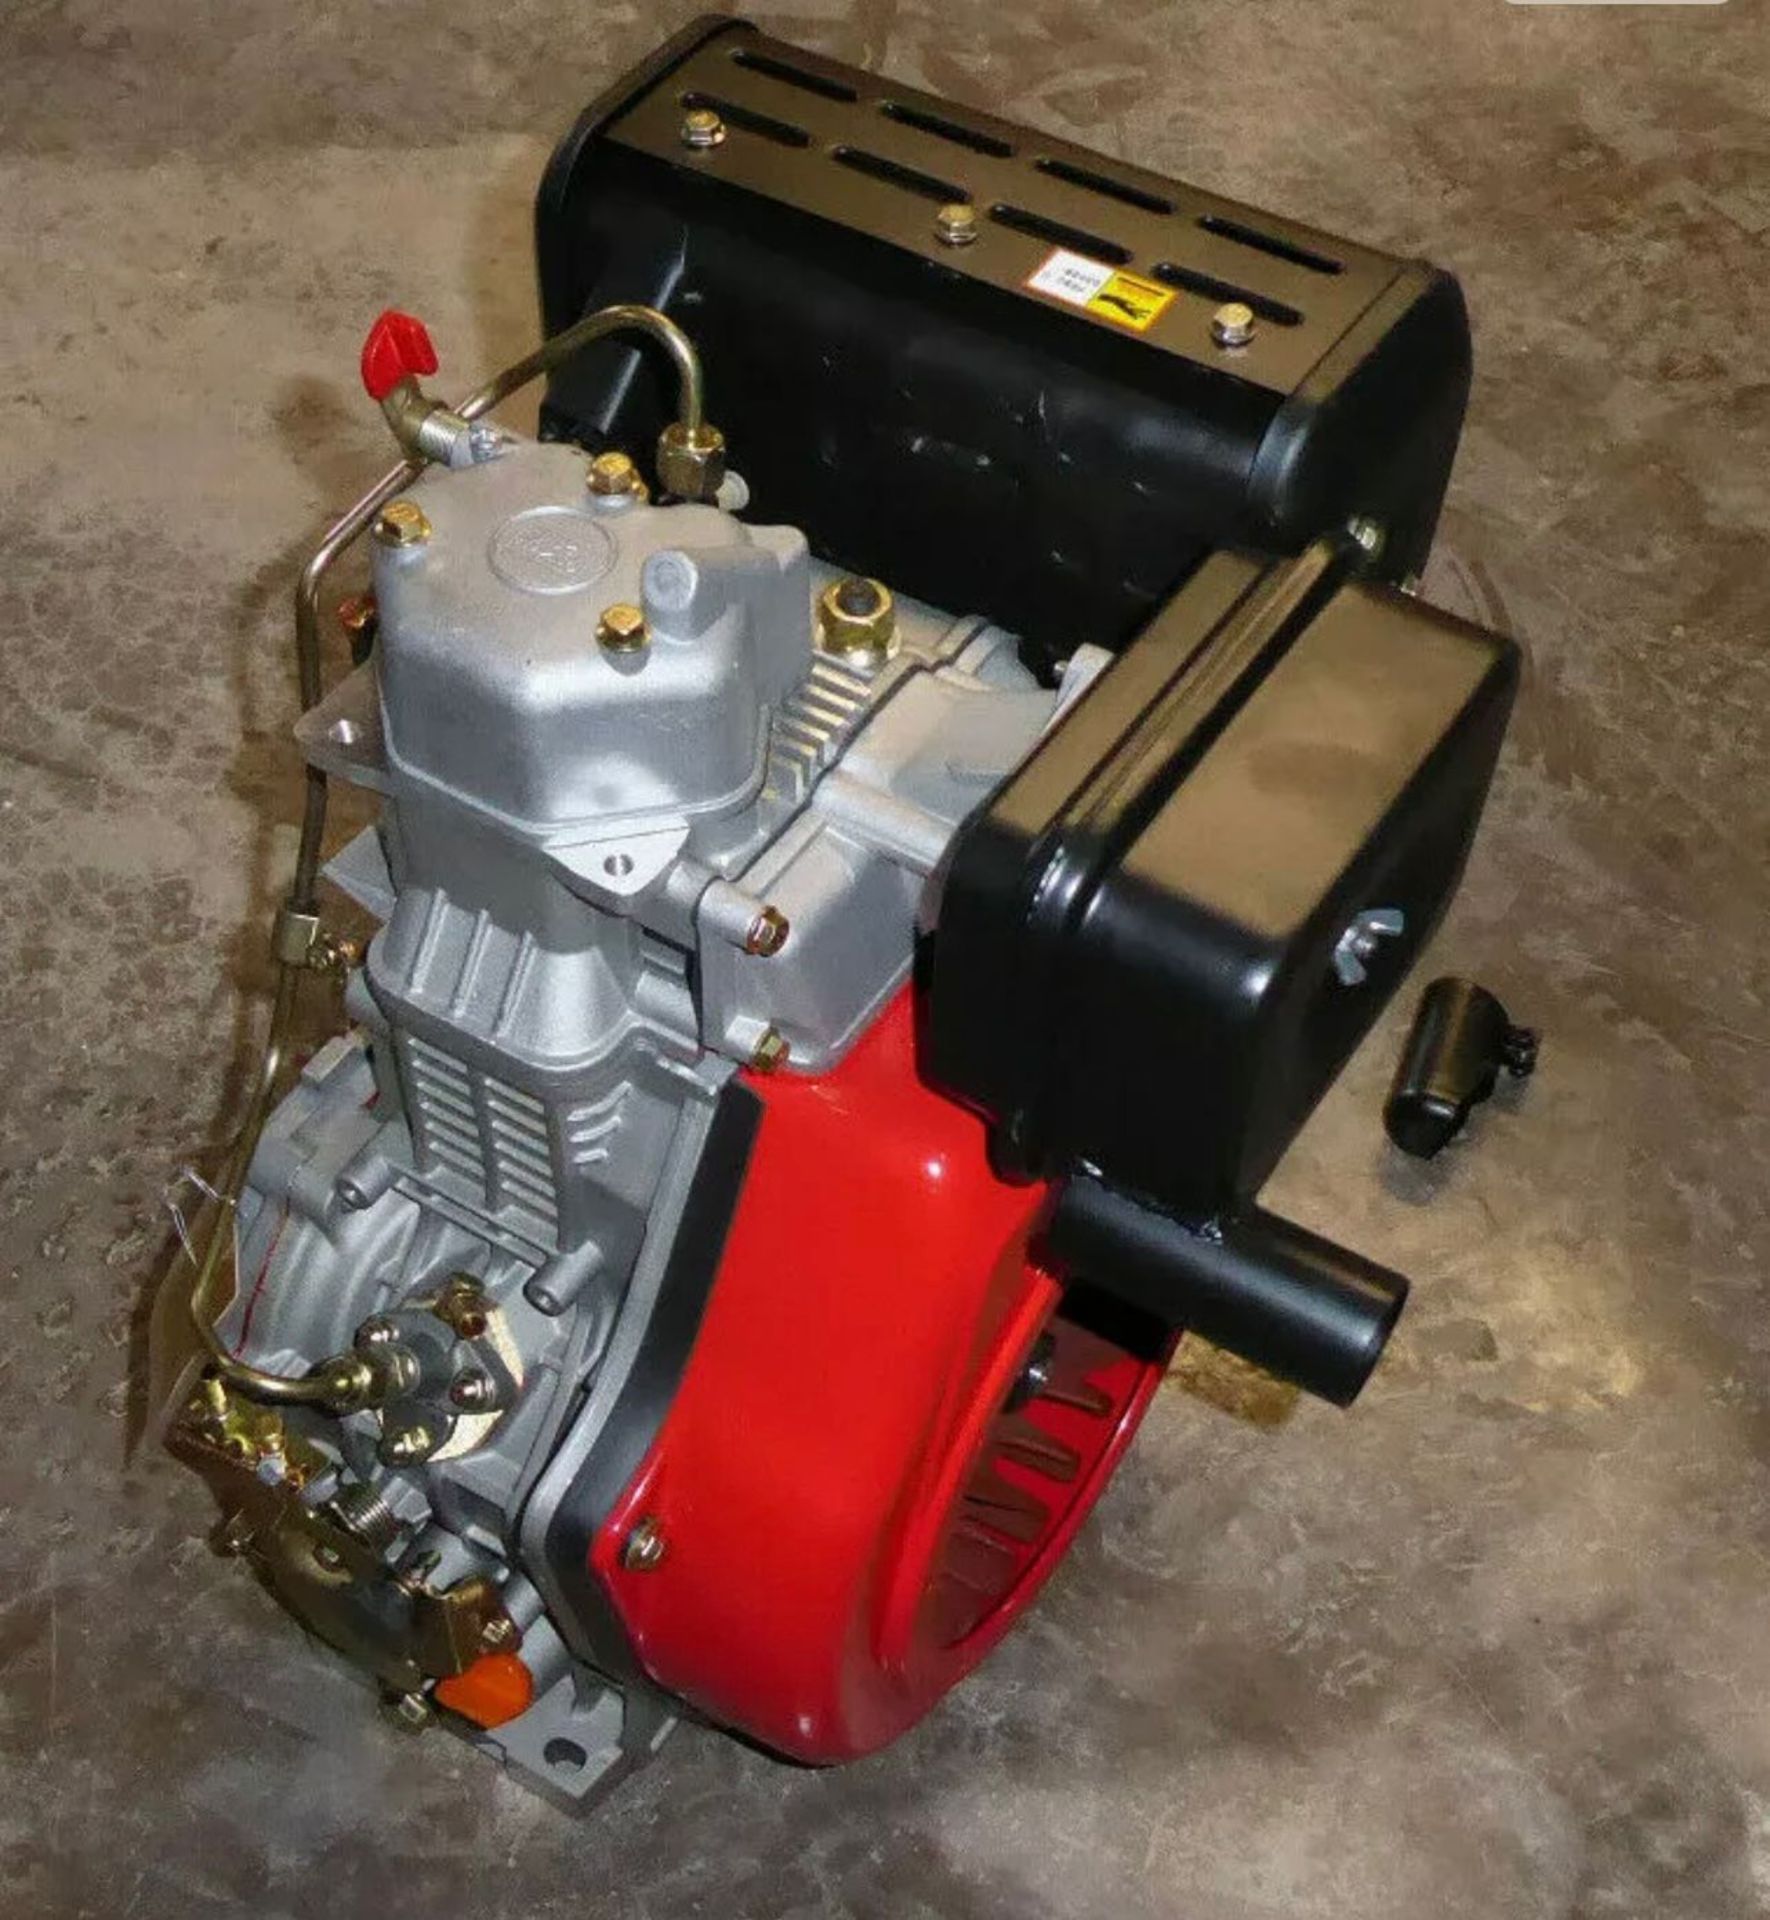 NEW AND UNUSED CHANGHAI 192FA DIESEL ENGINE, SUITABLE FOR MINI DIGGER, STILL IN BOX *PLUS VAT* - Image 4 of 6